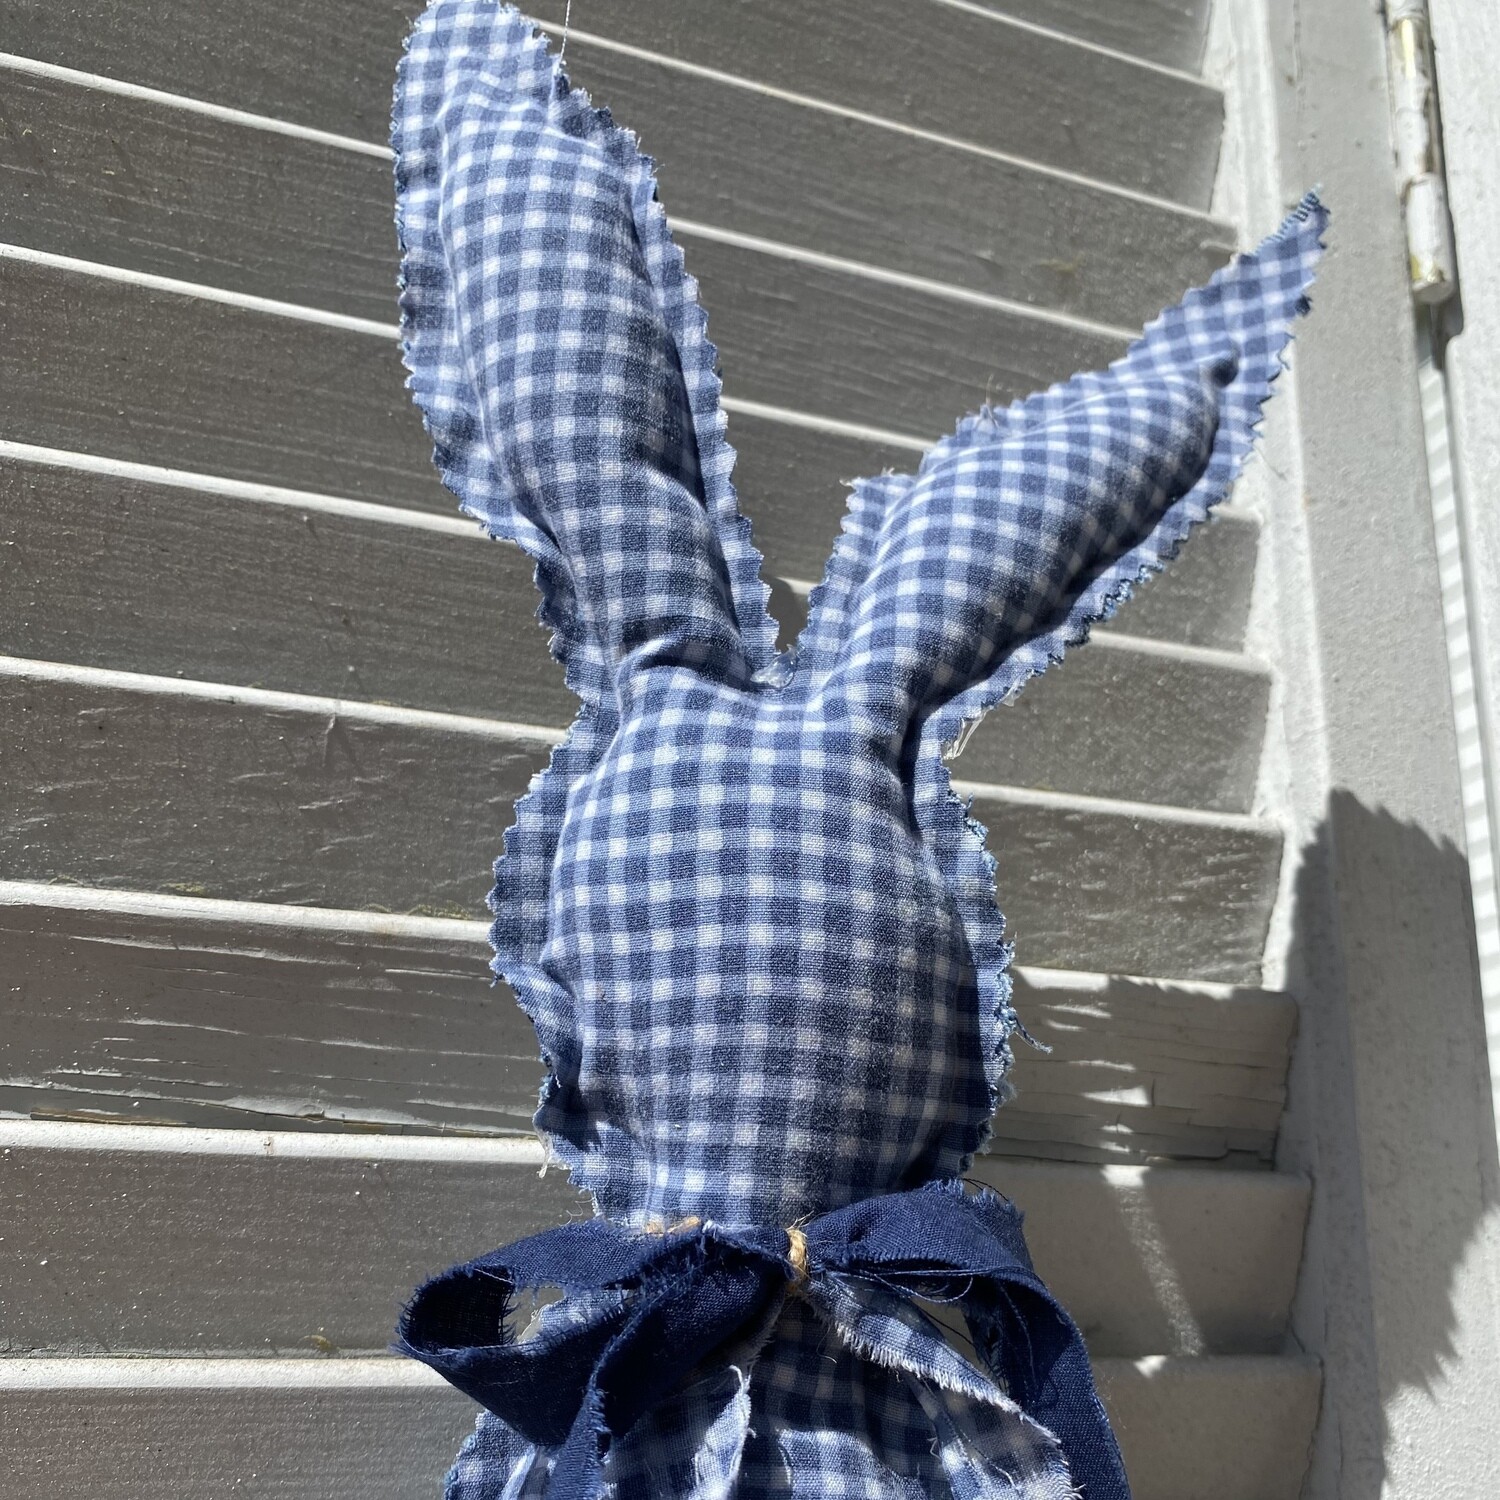 Large Rustic Fabric Bunny (Checkered blue and white)